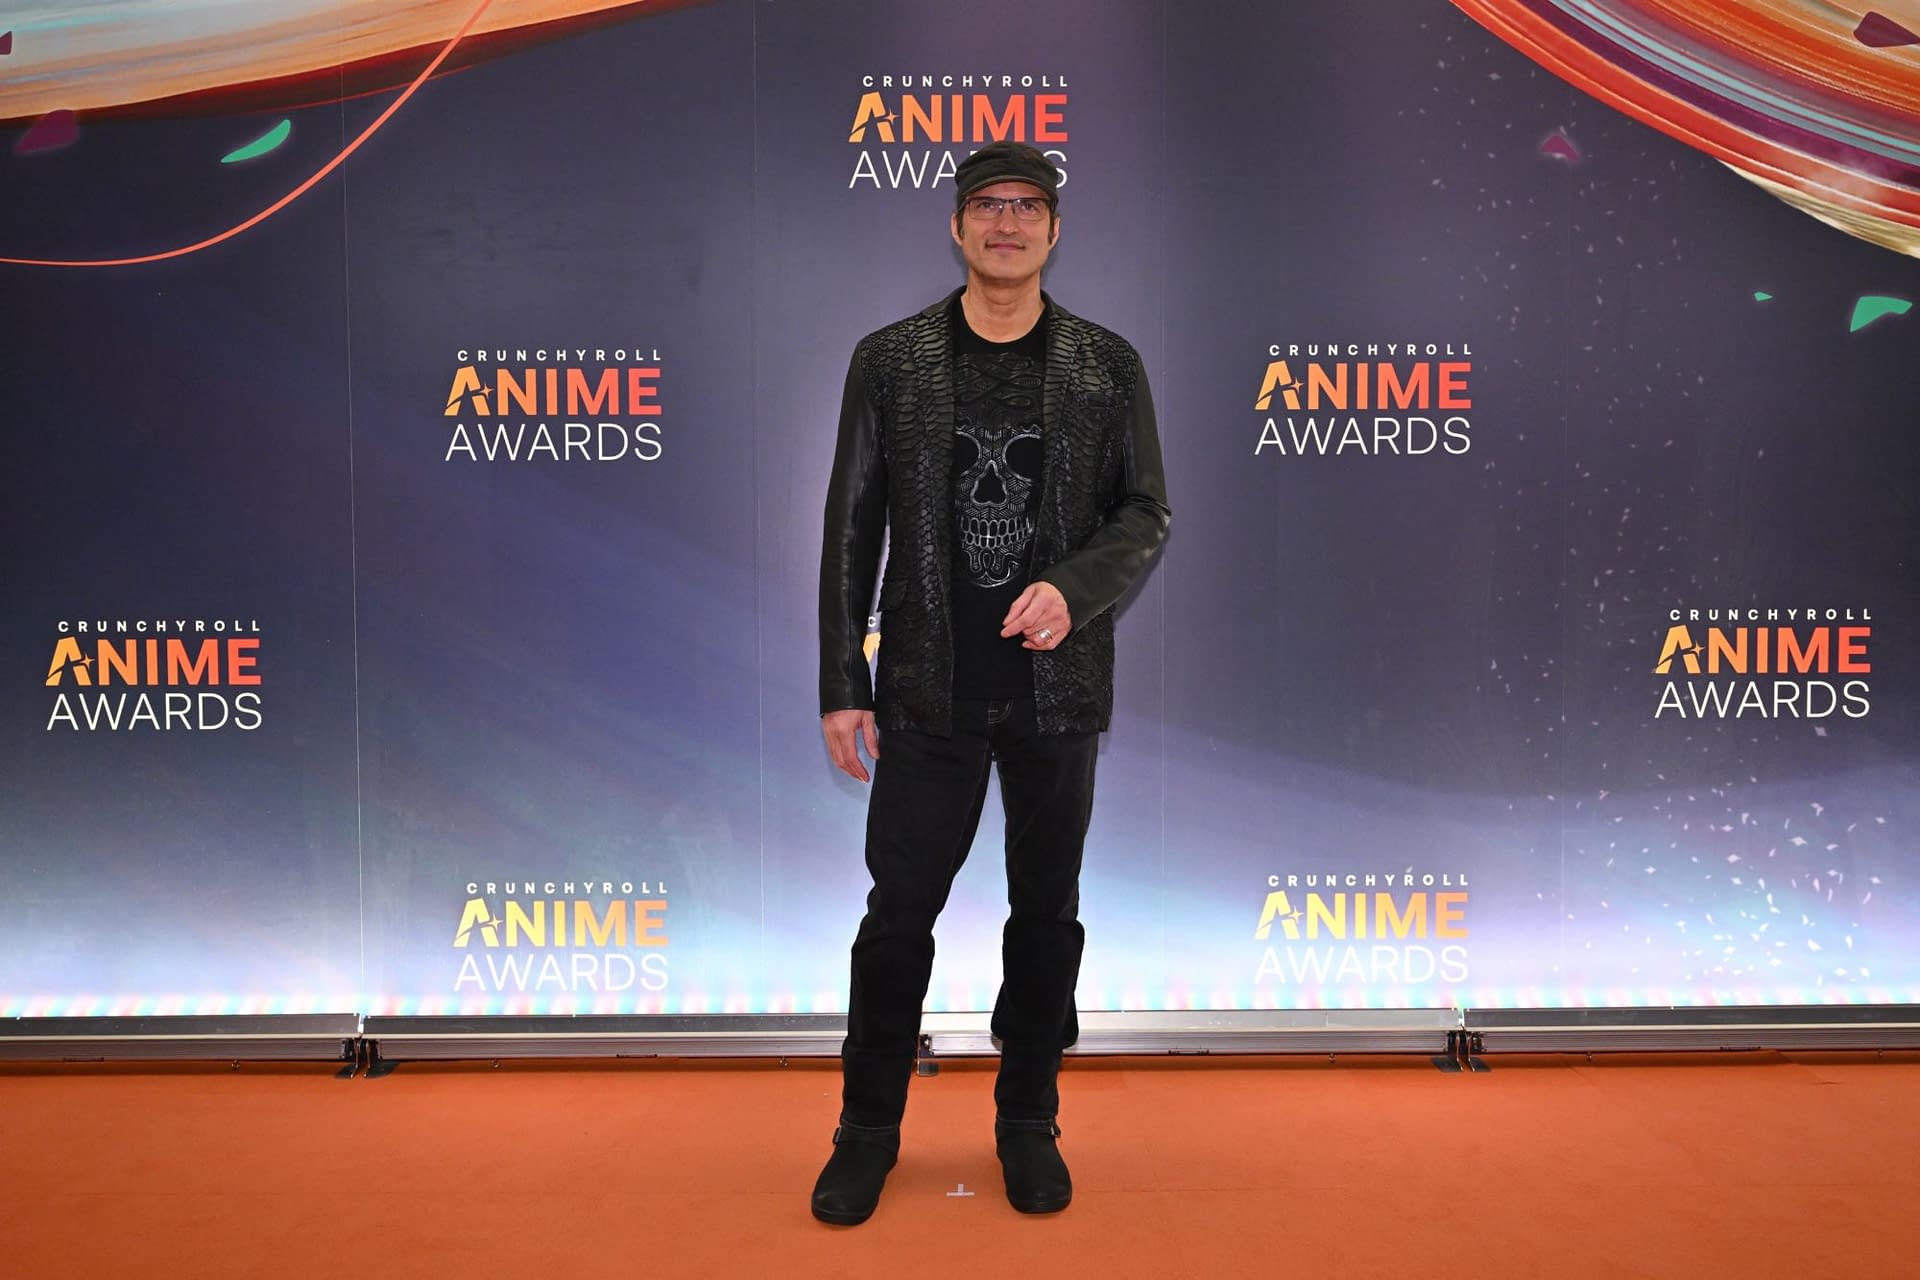 Cyberpunk: Edgerunners' Takes Home The Biggest Prize At 2023 Anime Awards -  Entertainment